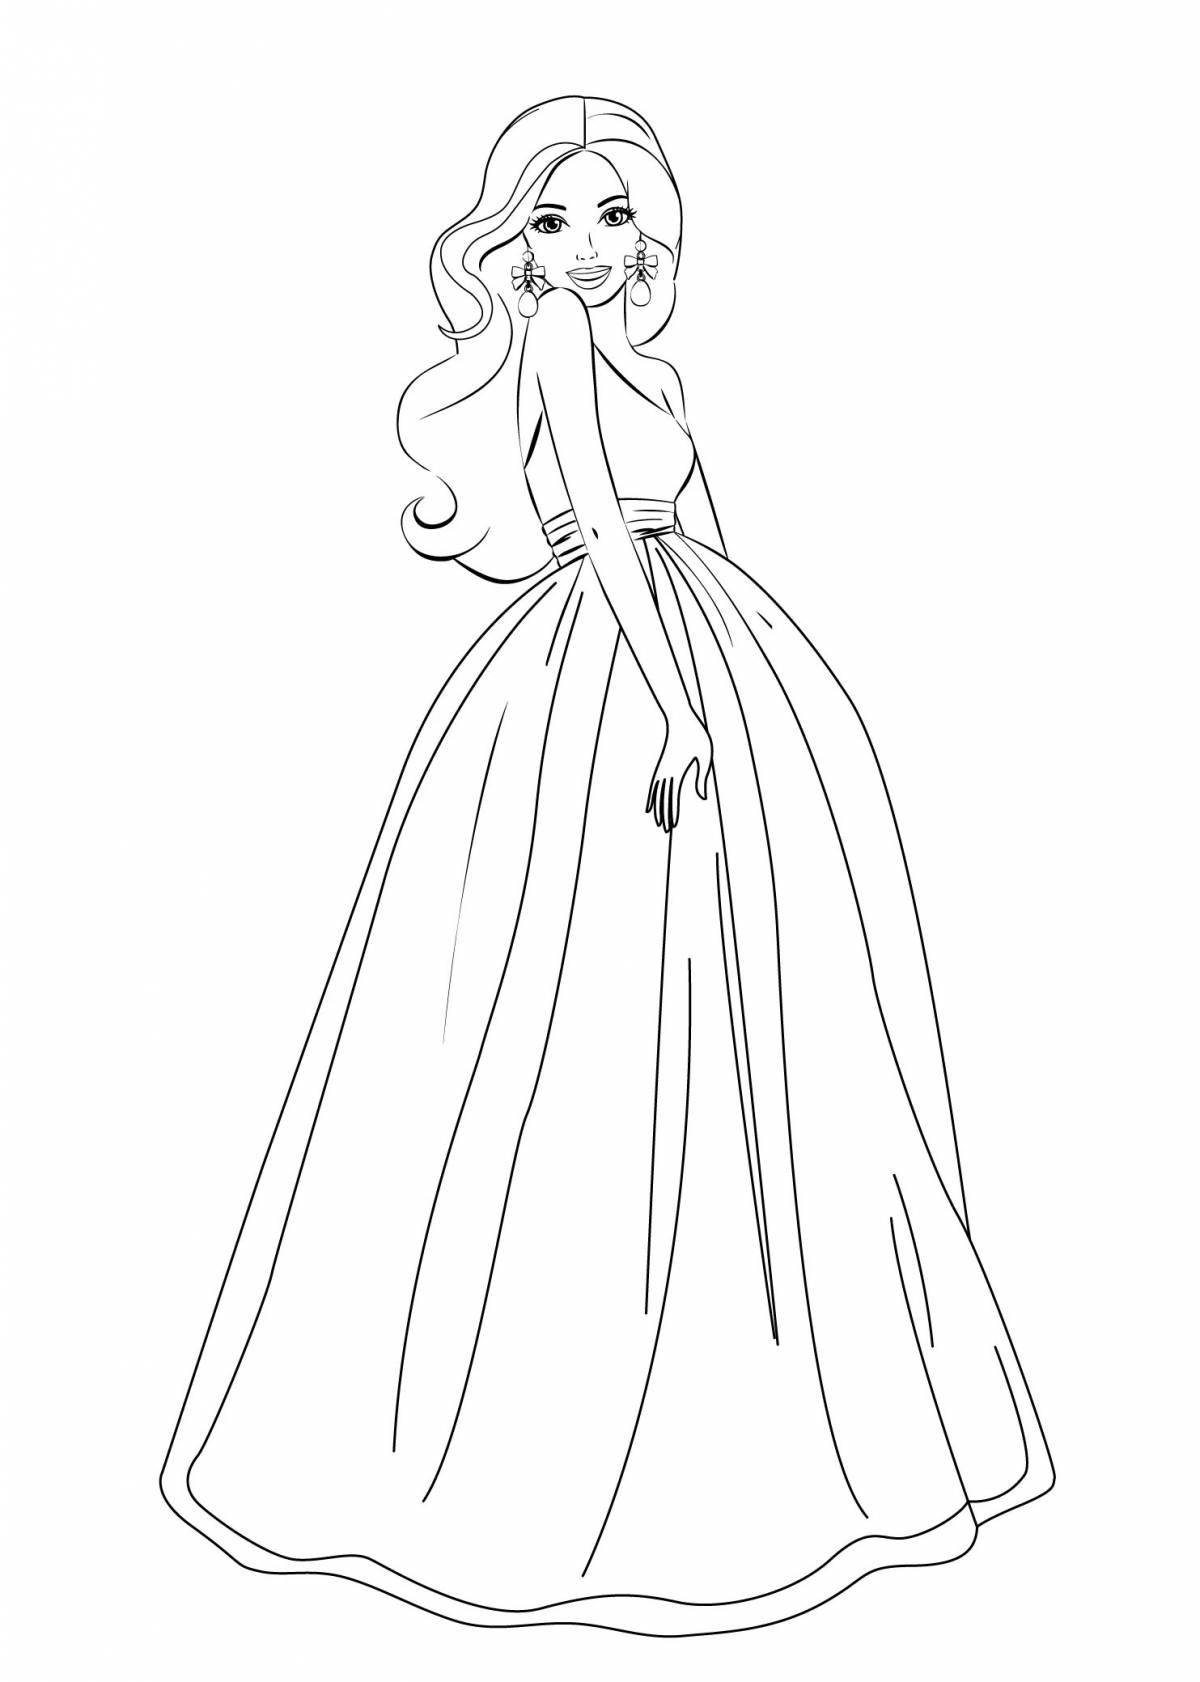 Live coloring of a girl in a dress